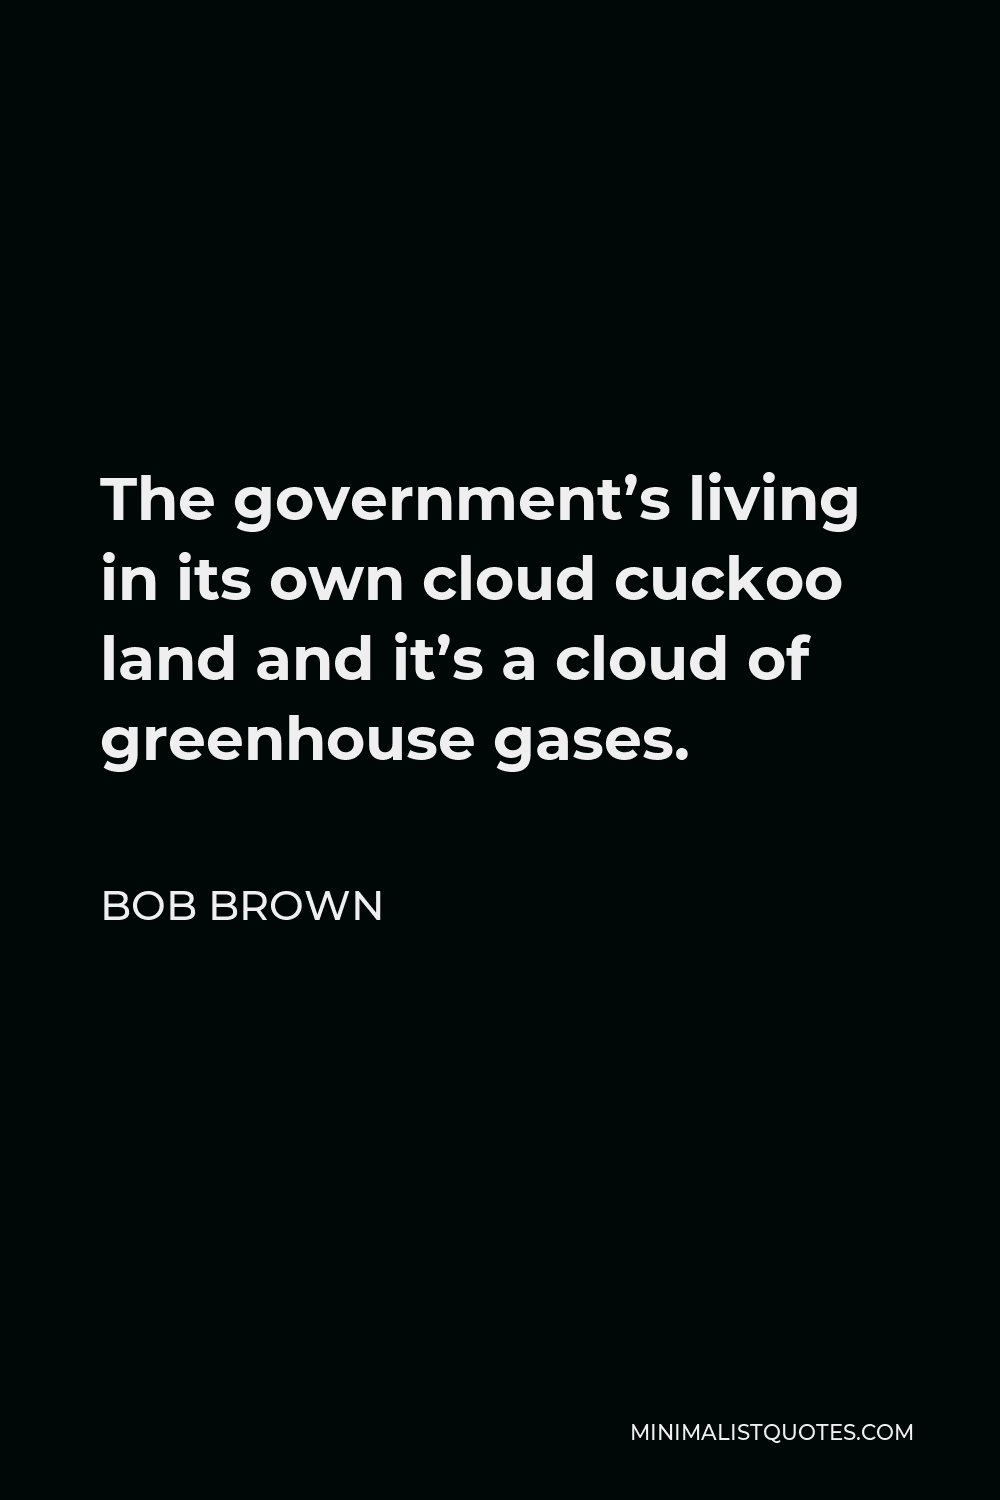 Bob Brown Quote - The government’s living in its own cloud cuckoo land and it’s a cloud of greenhouse gases.